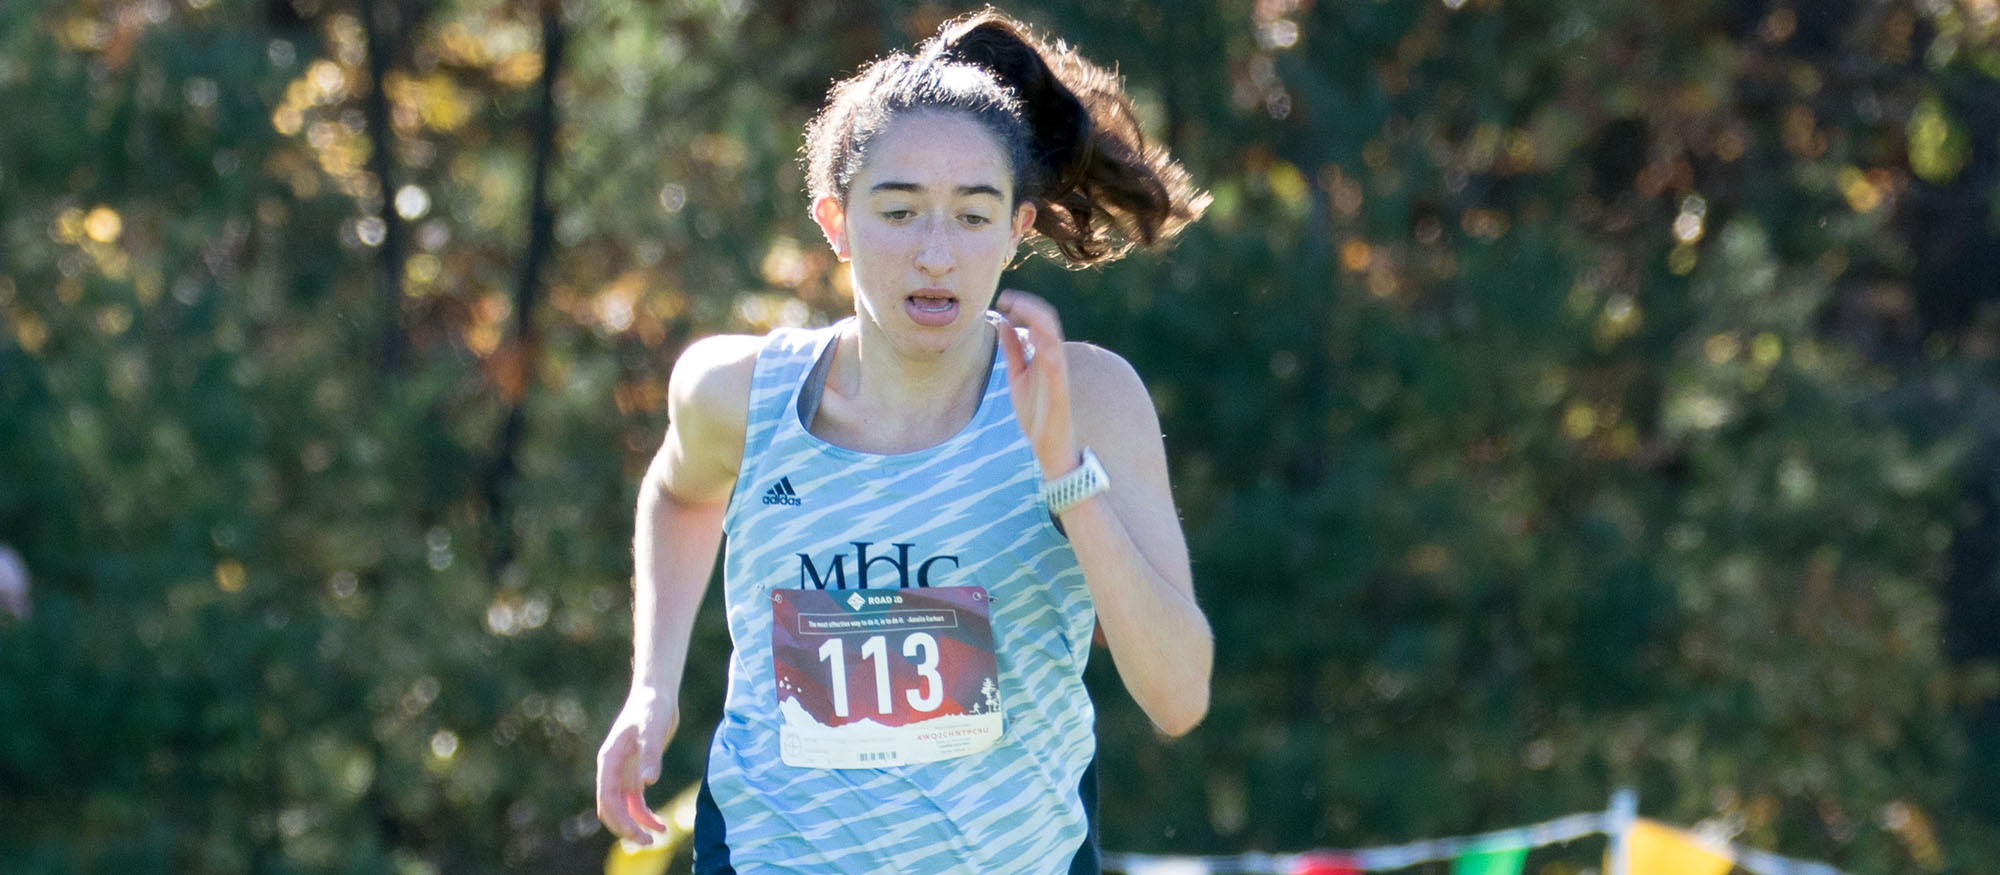 Selkin Claims Victory at Wellesley Cross Country Invitational; Lyons Finish Fourth Overall